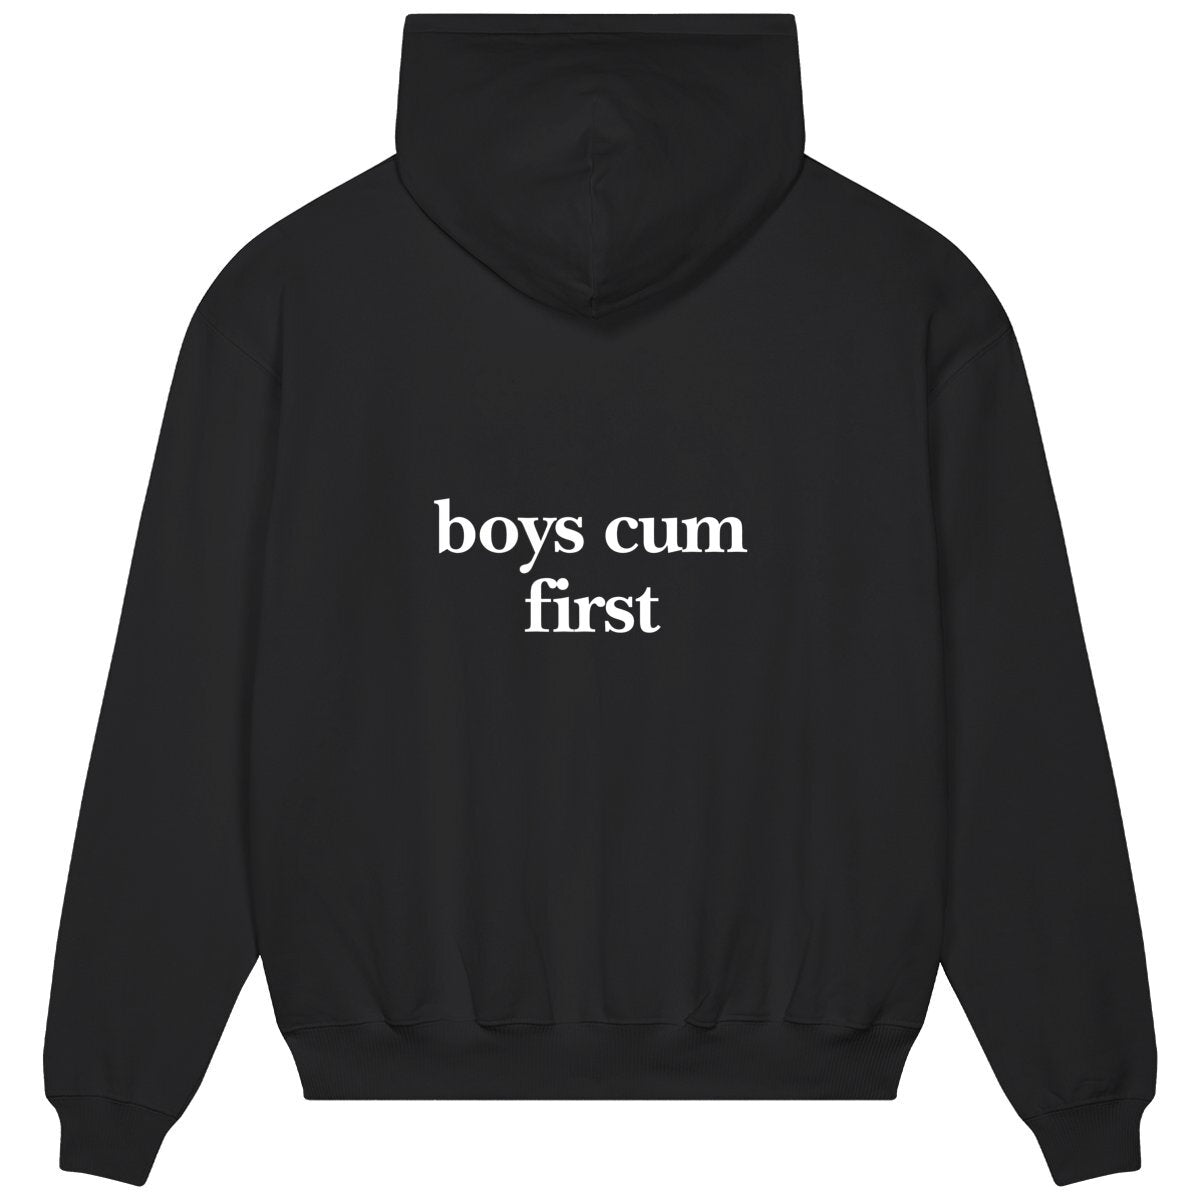 boys cum first hoodie oversized. garçon garçon essentiel oversized hoodie. Sleek in black and whispering Parisian chic, this hoodie is the sartorial whisper of 'garçon garçon' — a statement of understated elegance. Perfect for those who carry a piece of Paris in their hearts and a touch of audacity on their sleeves.